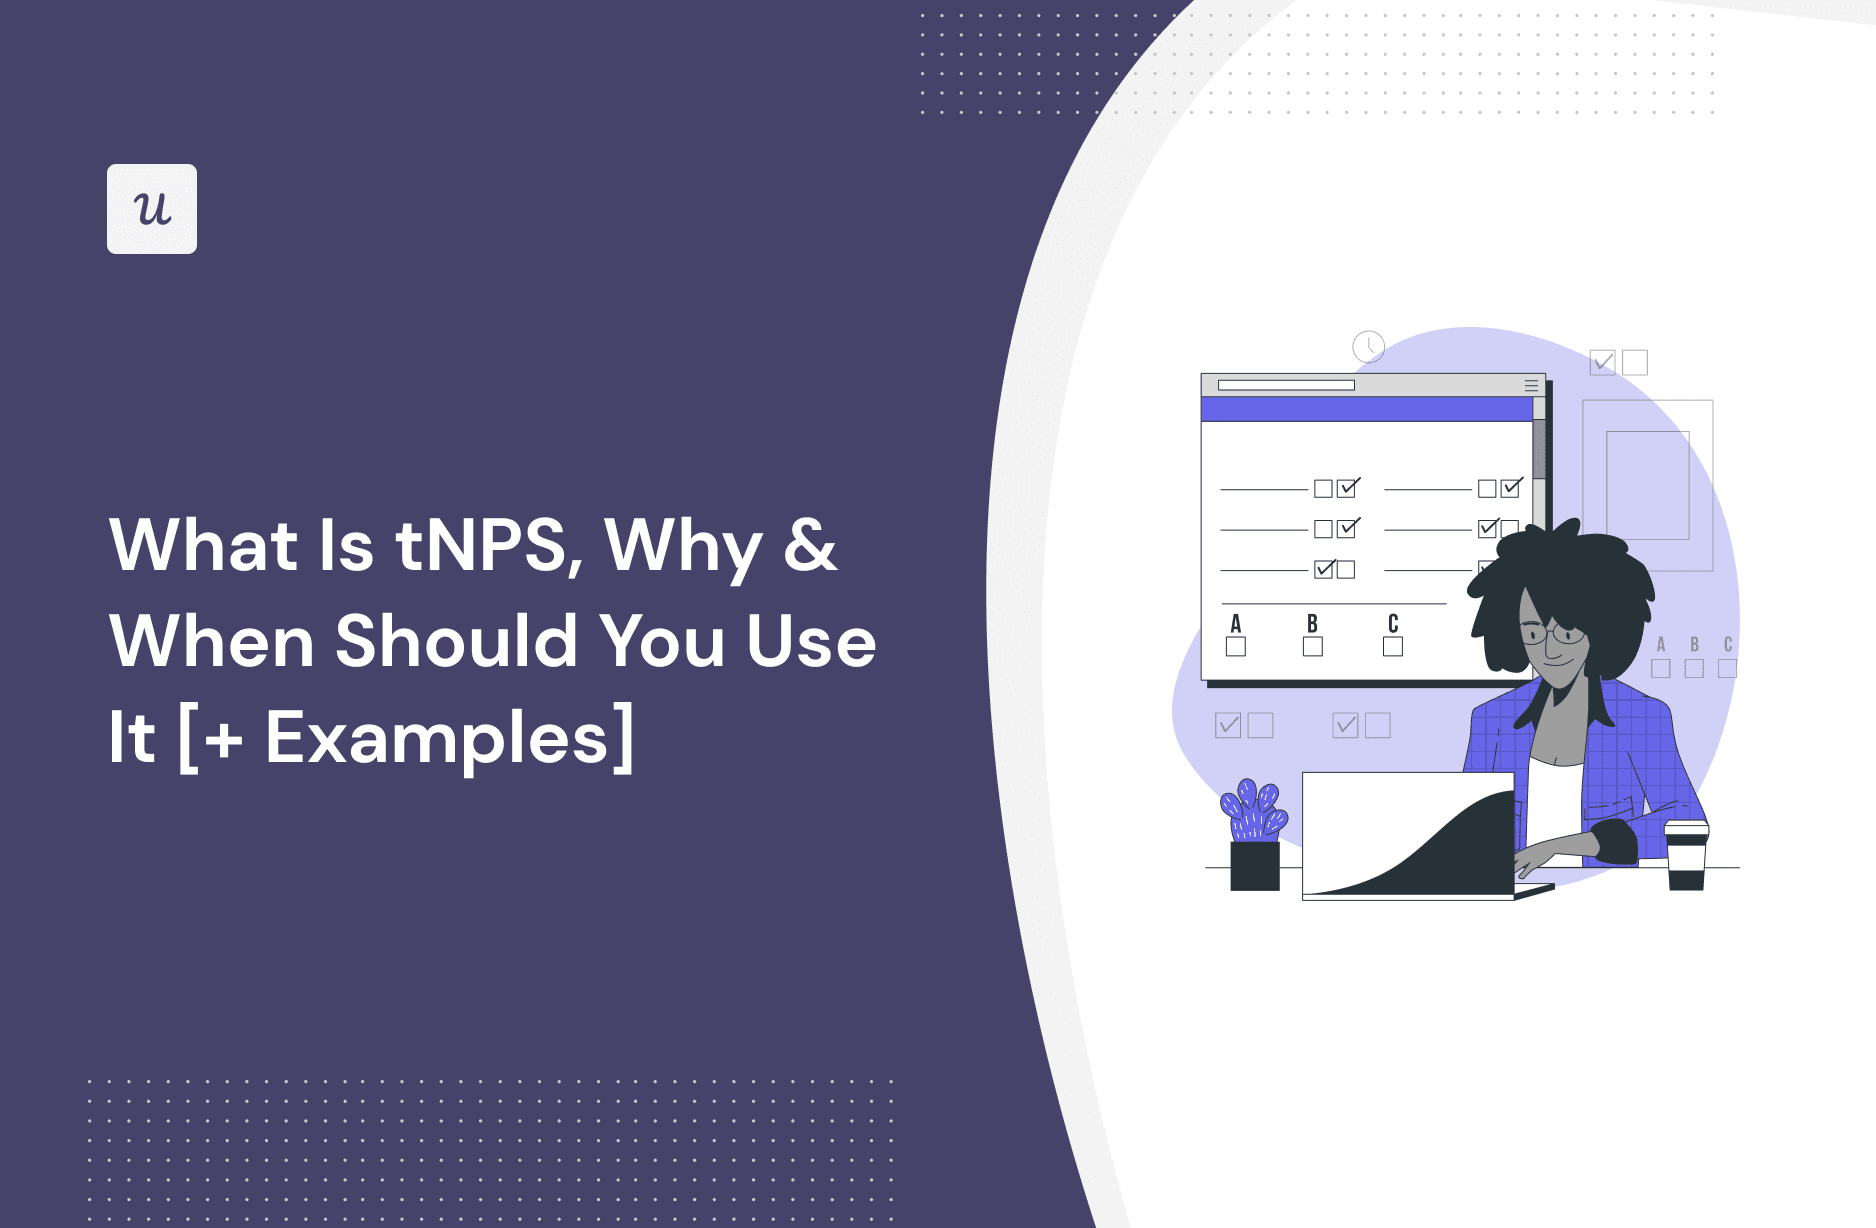 What Is tNPS, Why & When Should You Use It [+ Examples] cover